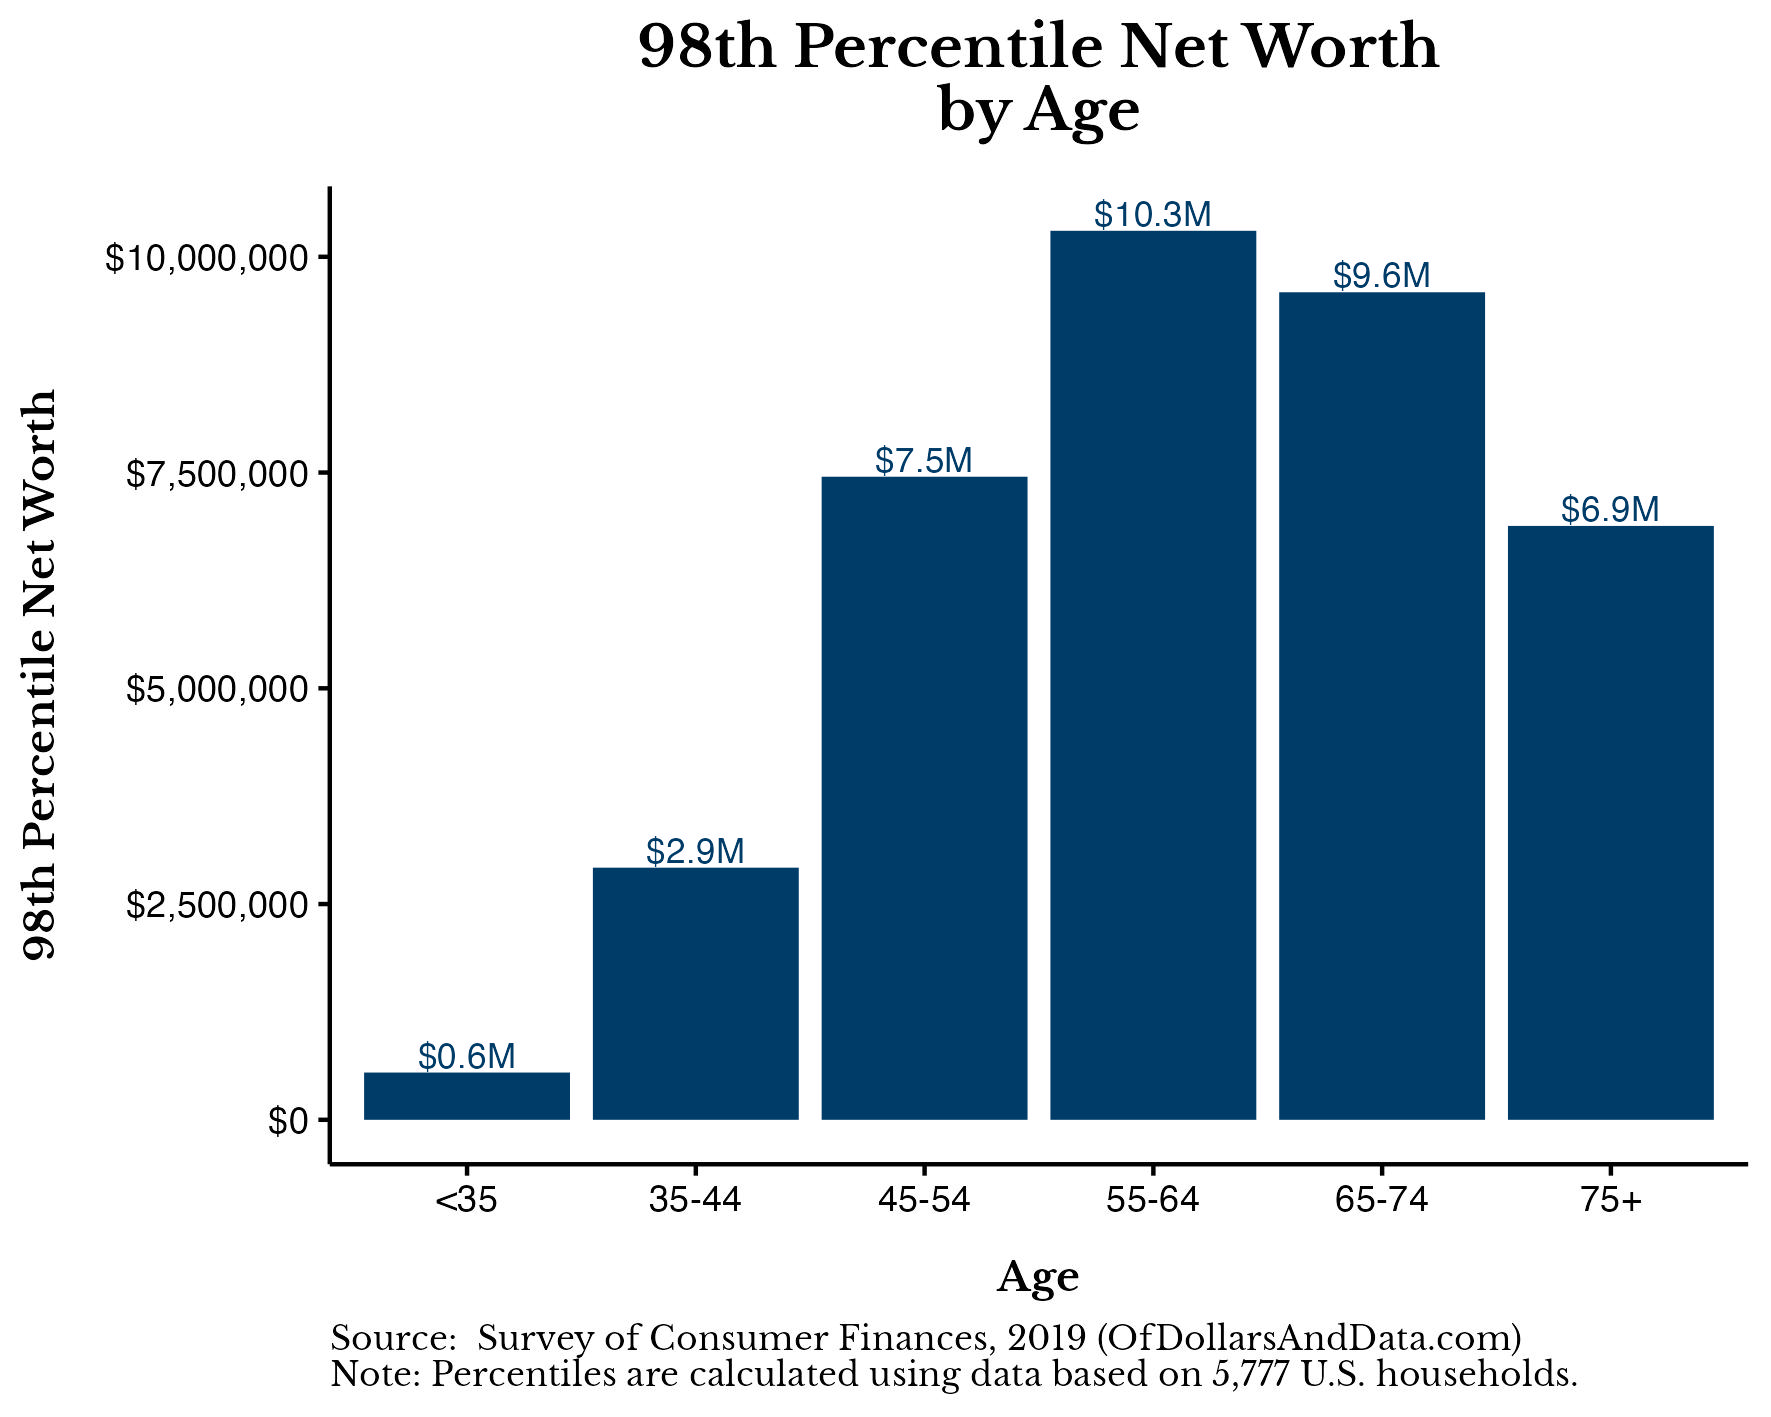 Chart of U.S. household net worth by age at the 98th percentile using the 2019 Survey of Consumer Finances data. This is the level where a typical household reaches Fat FIRE regardless of age.